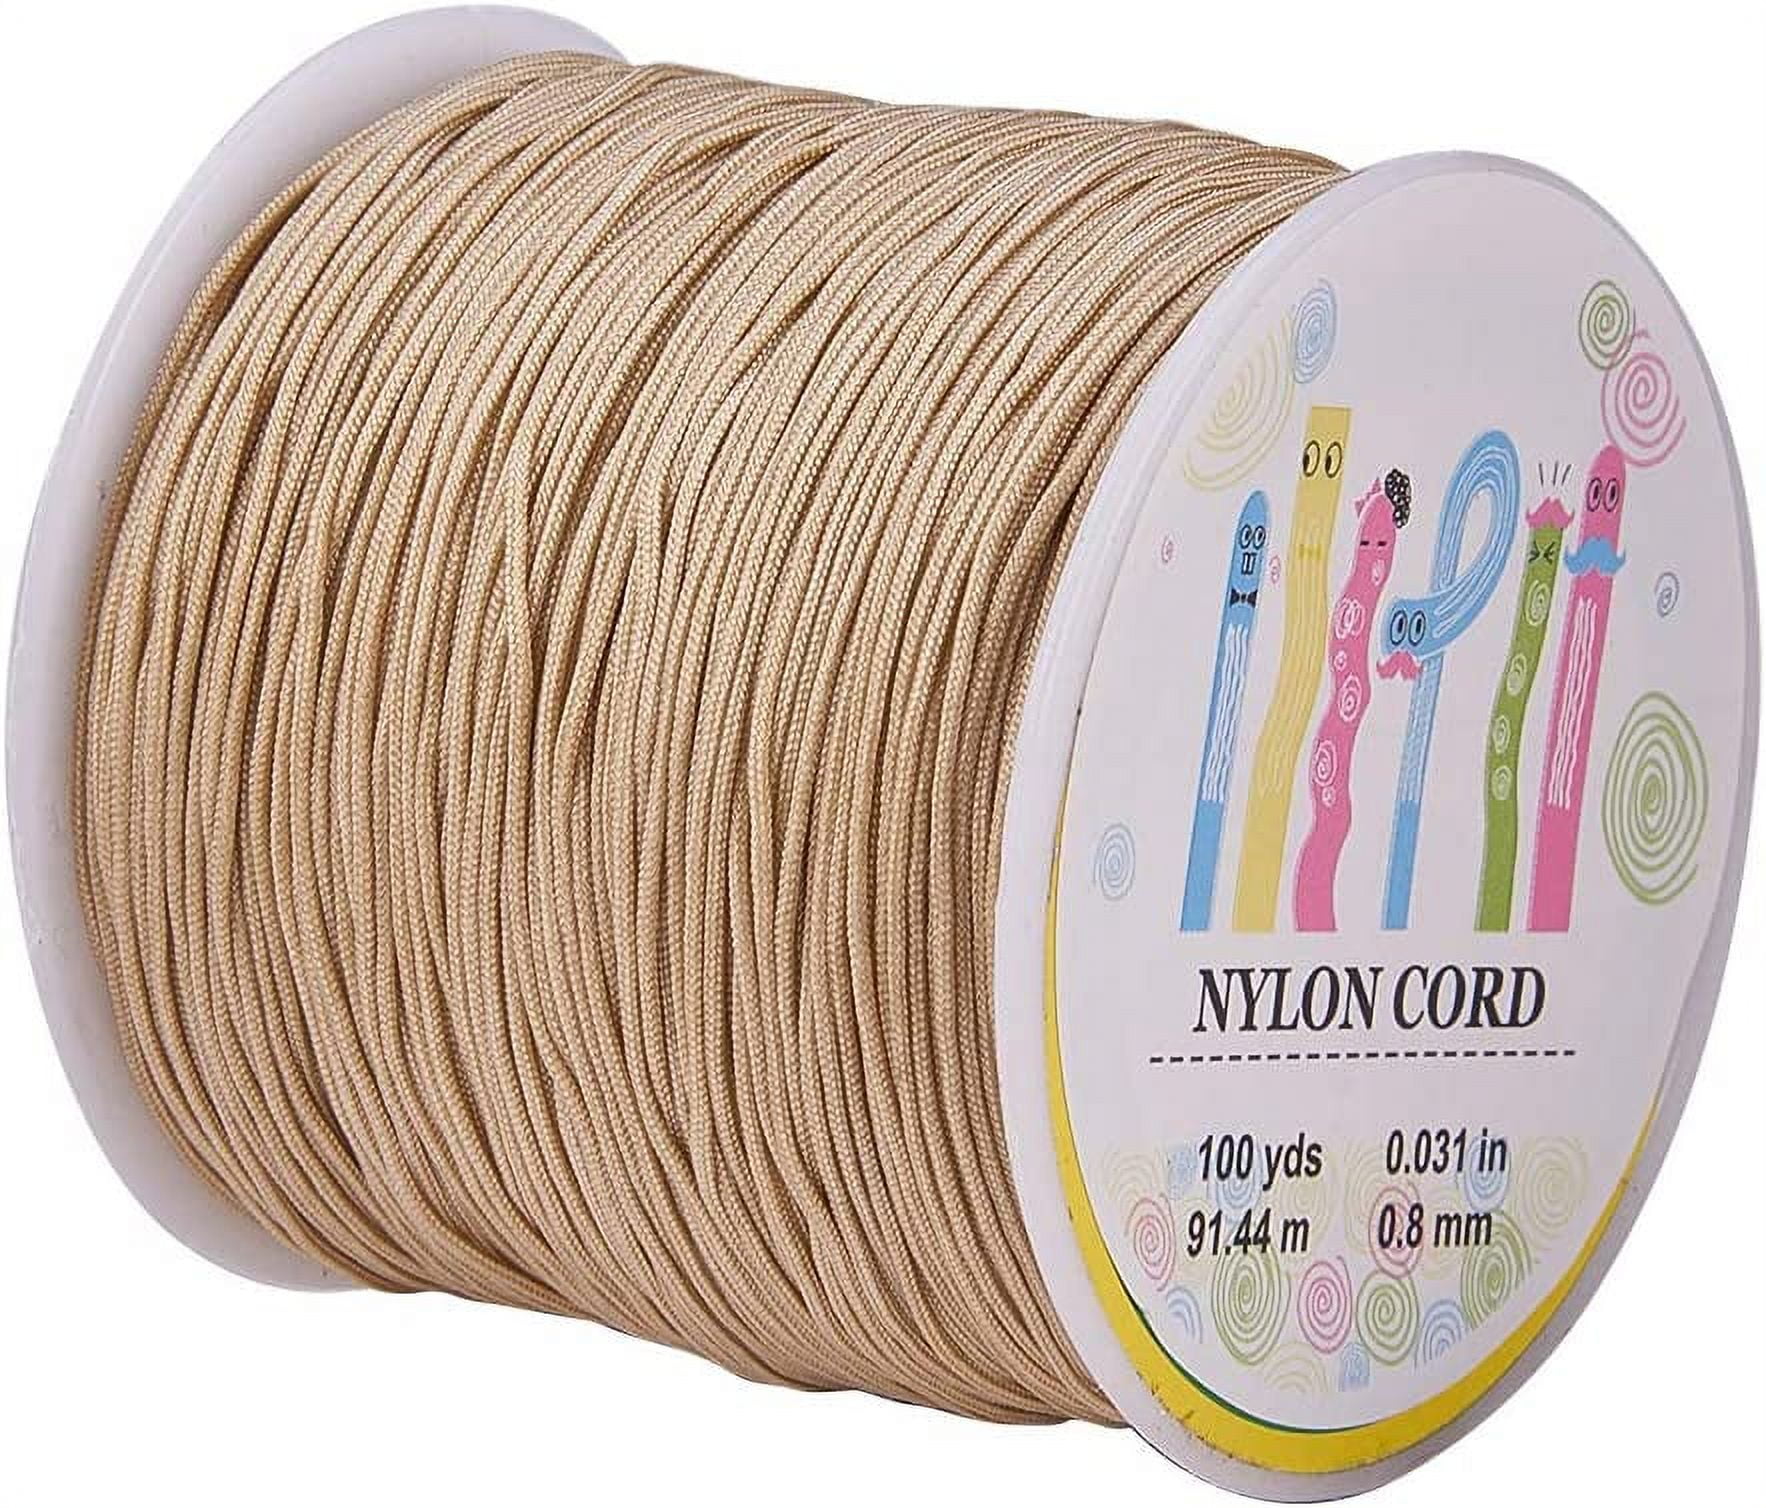 Nylon String for Bracelets, 25 Colors 1125 Yards Chinese Knotting Cord, 0.8 mm Nylon Cord for Jewelry Making, Beading, Necklaces, Kumihimo